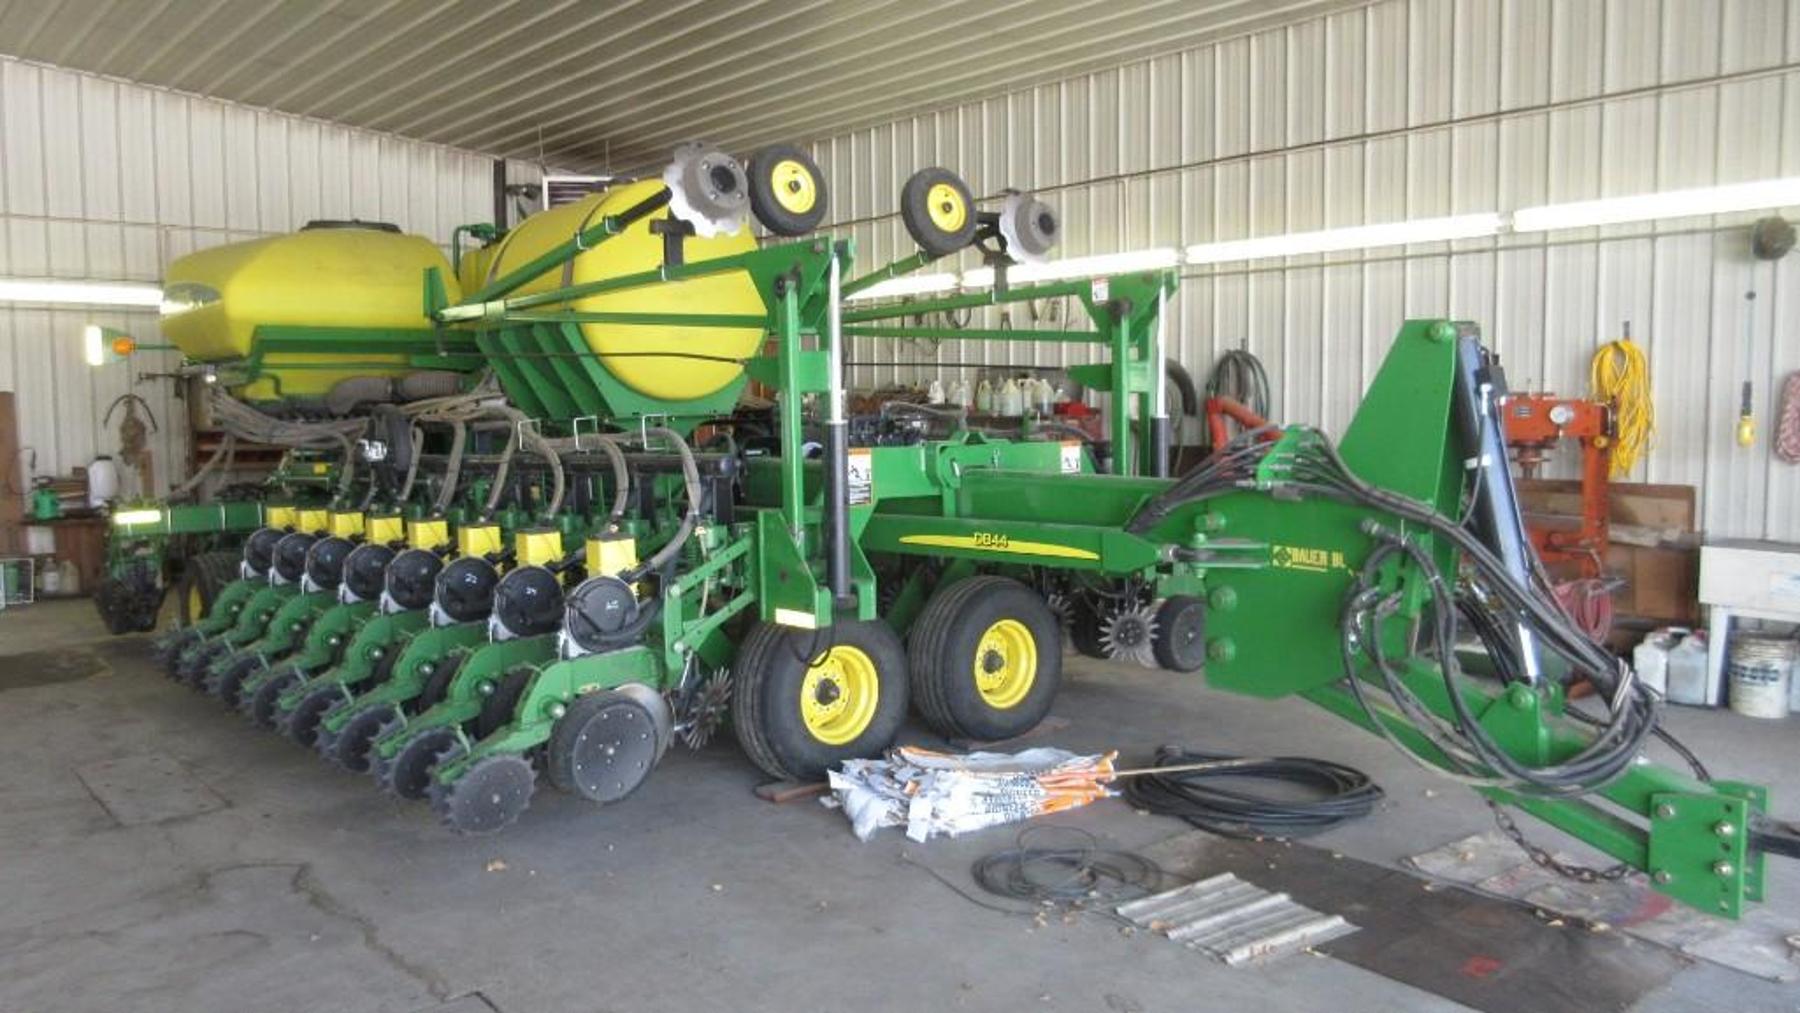 Farm Machinery Retirement/Consignment, Trailers, and More